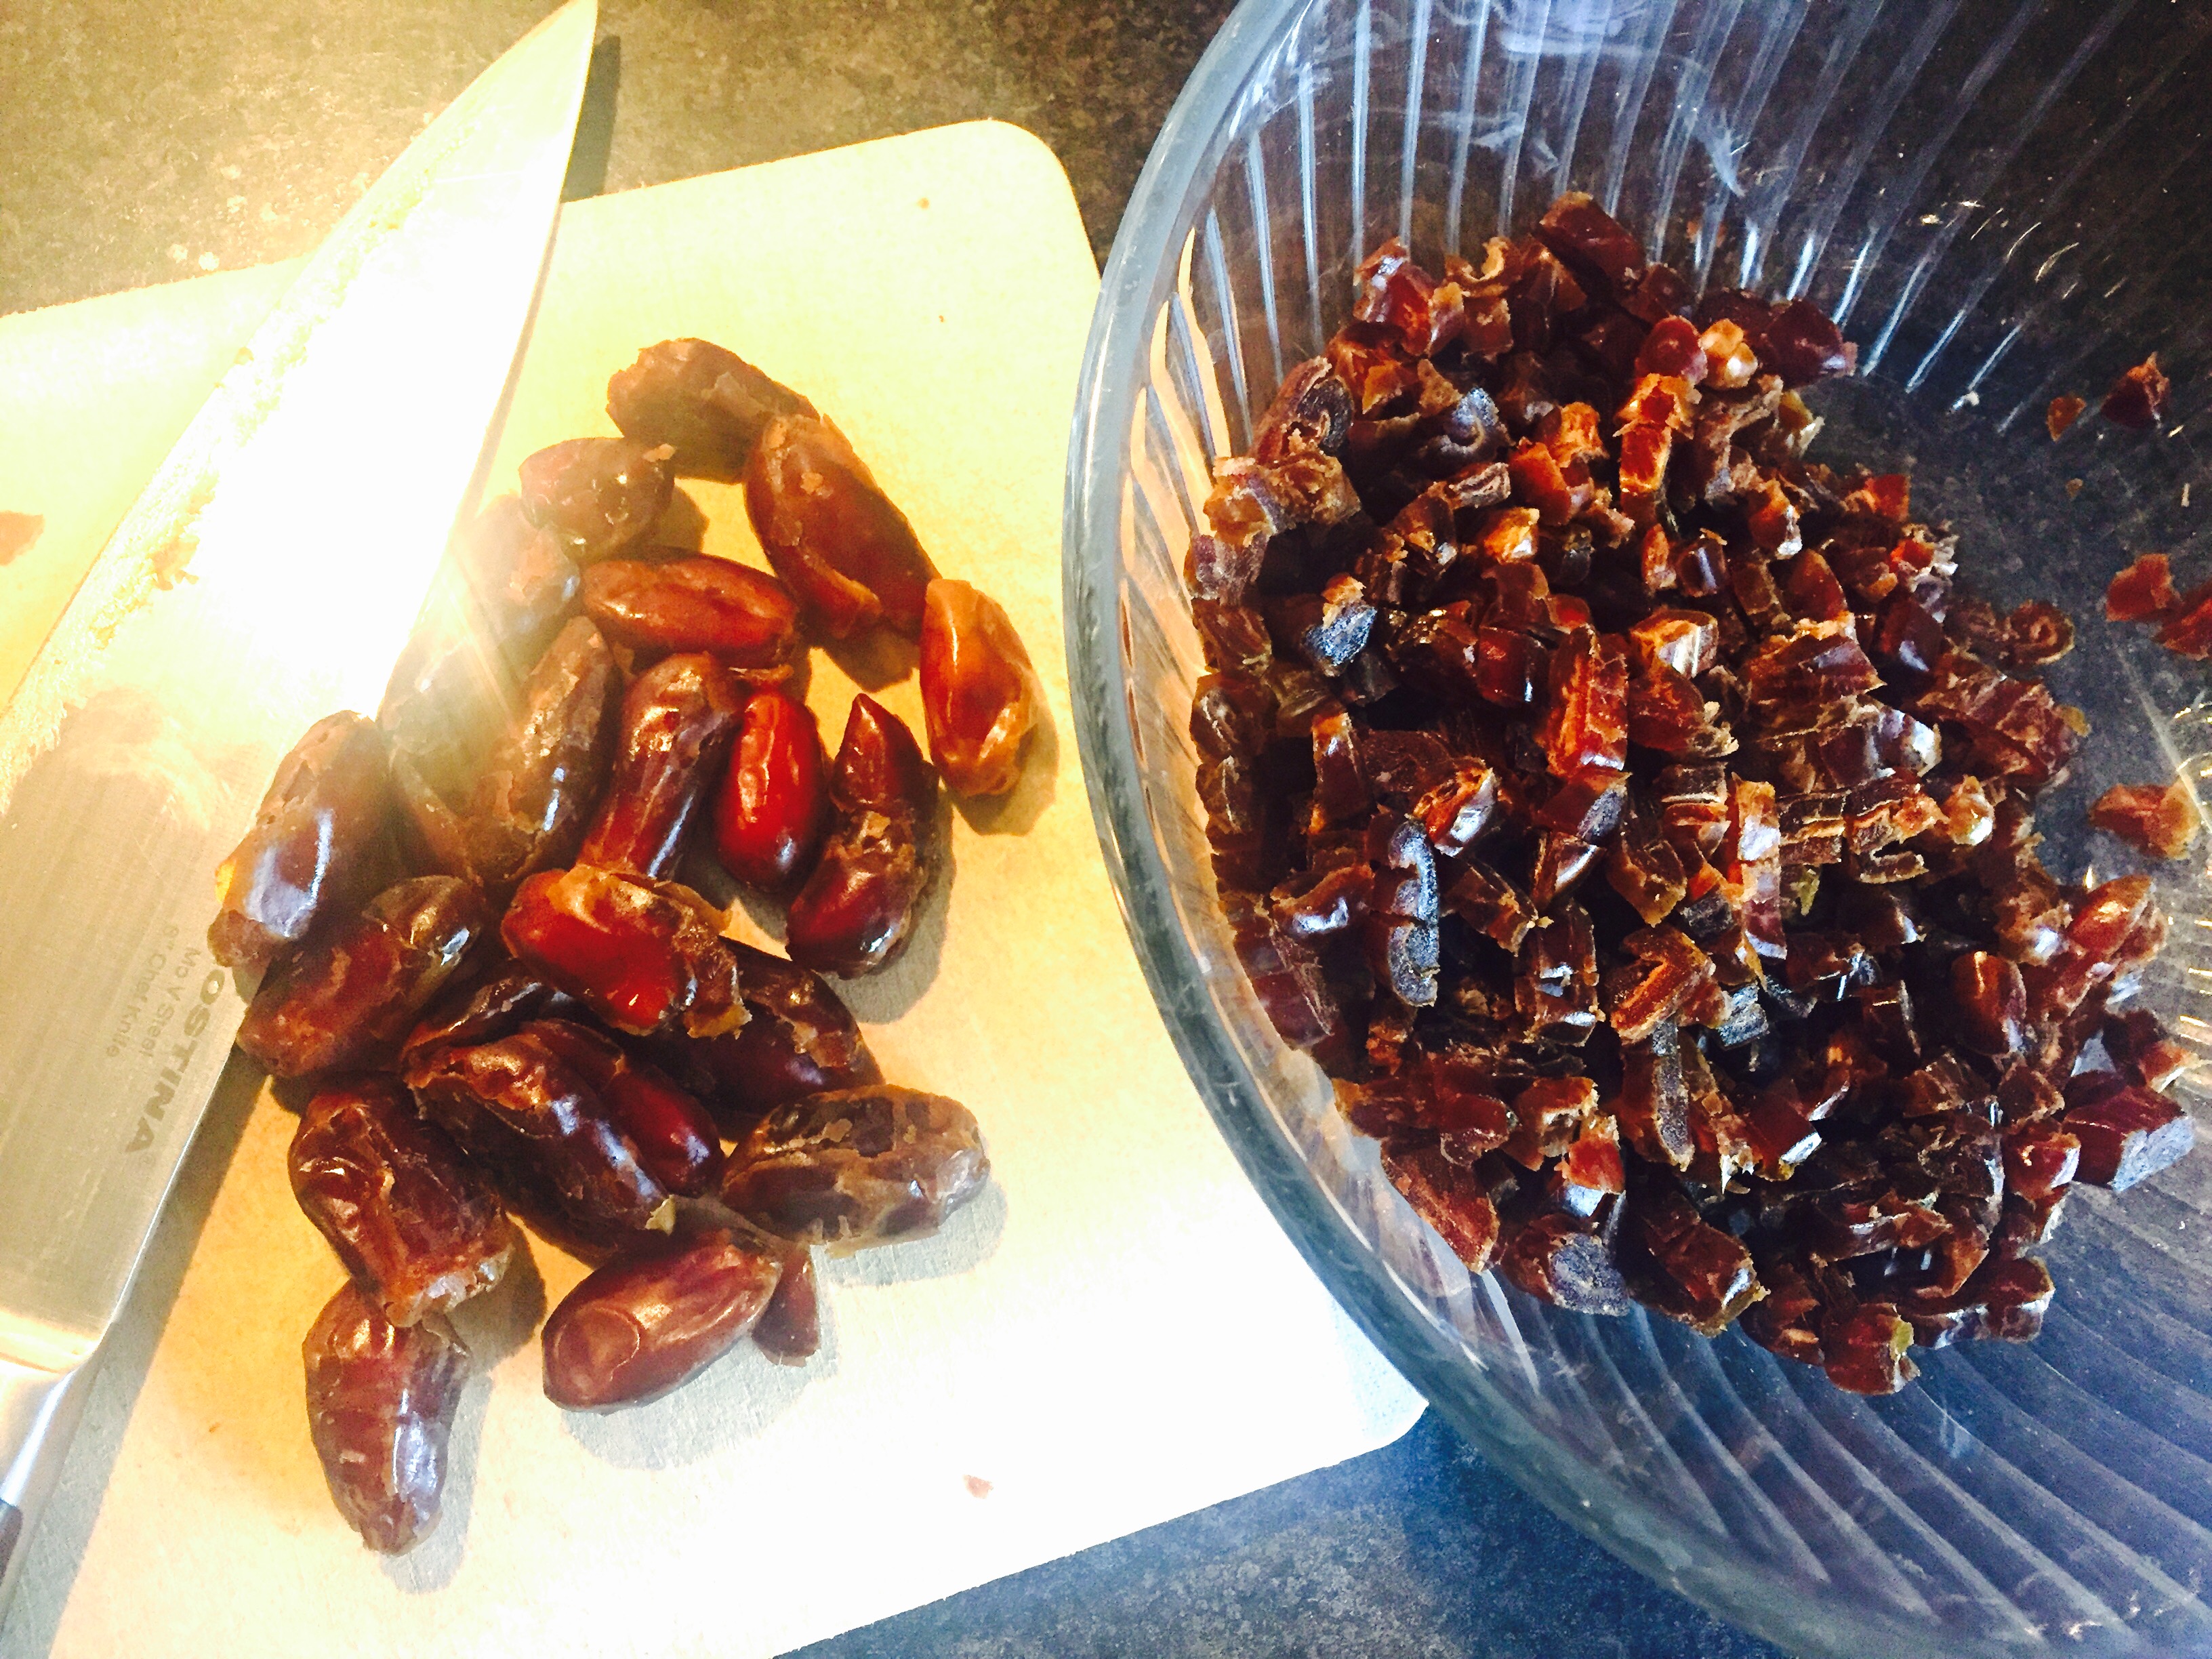 Chopping up some delicious pitted dates